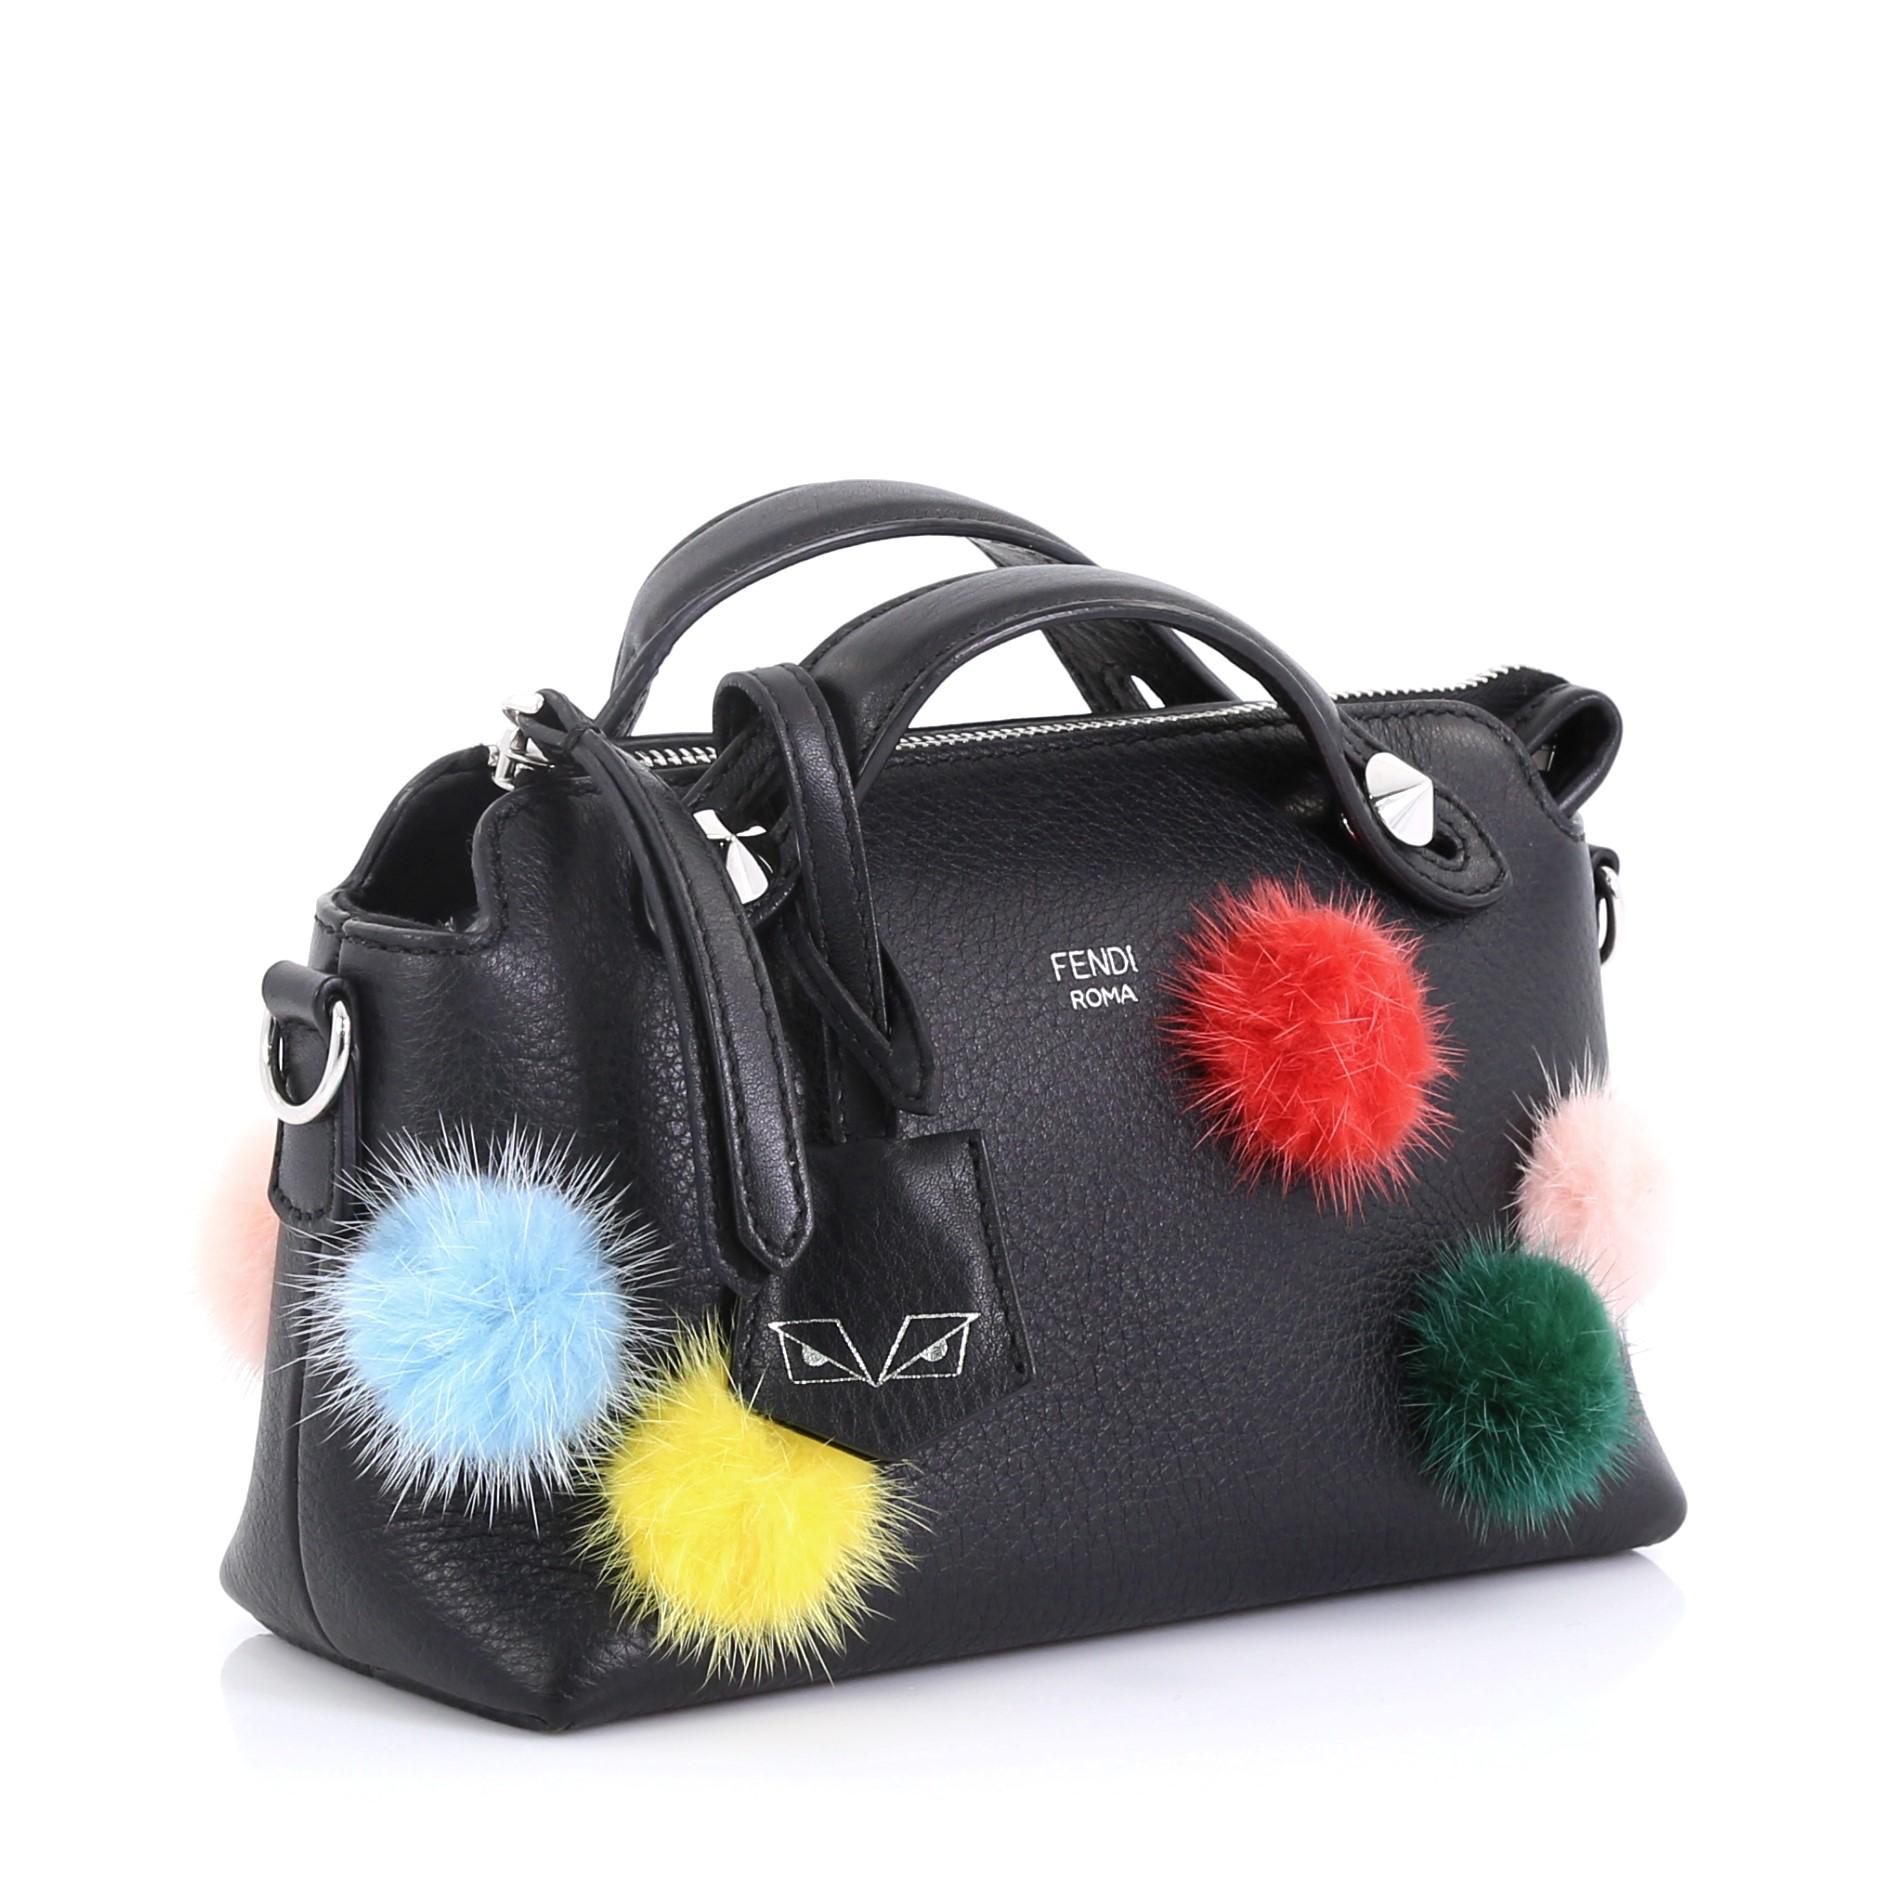 This Fendi By The Way Satchel Pom Pom Leather Mini, crafted from black leather, features dual flat top handles with cone studs, adjustable shoulder strap, dyed Denmark mink fur pompoms, and silver-tone hardware. Its top zip closure opens to a black